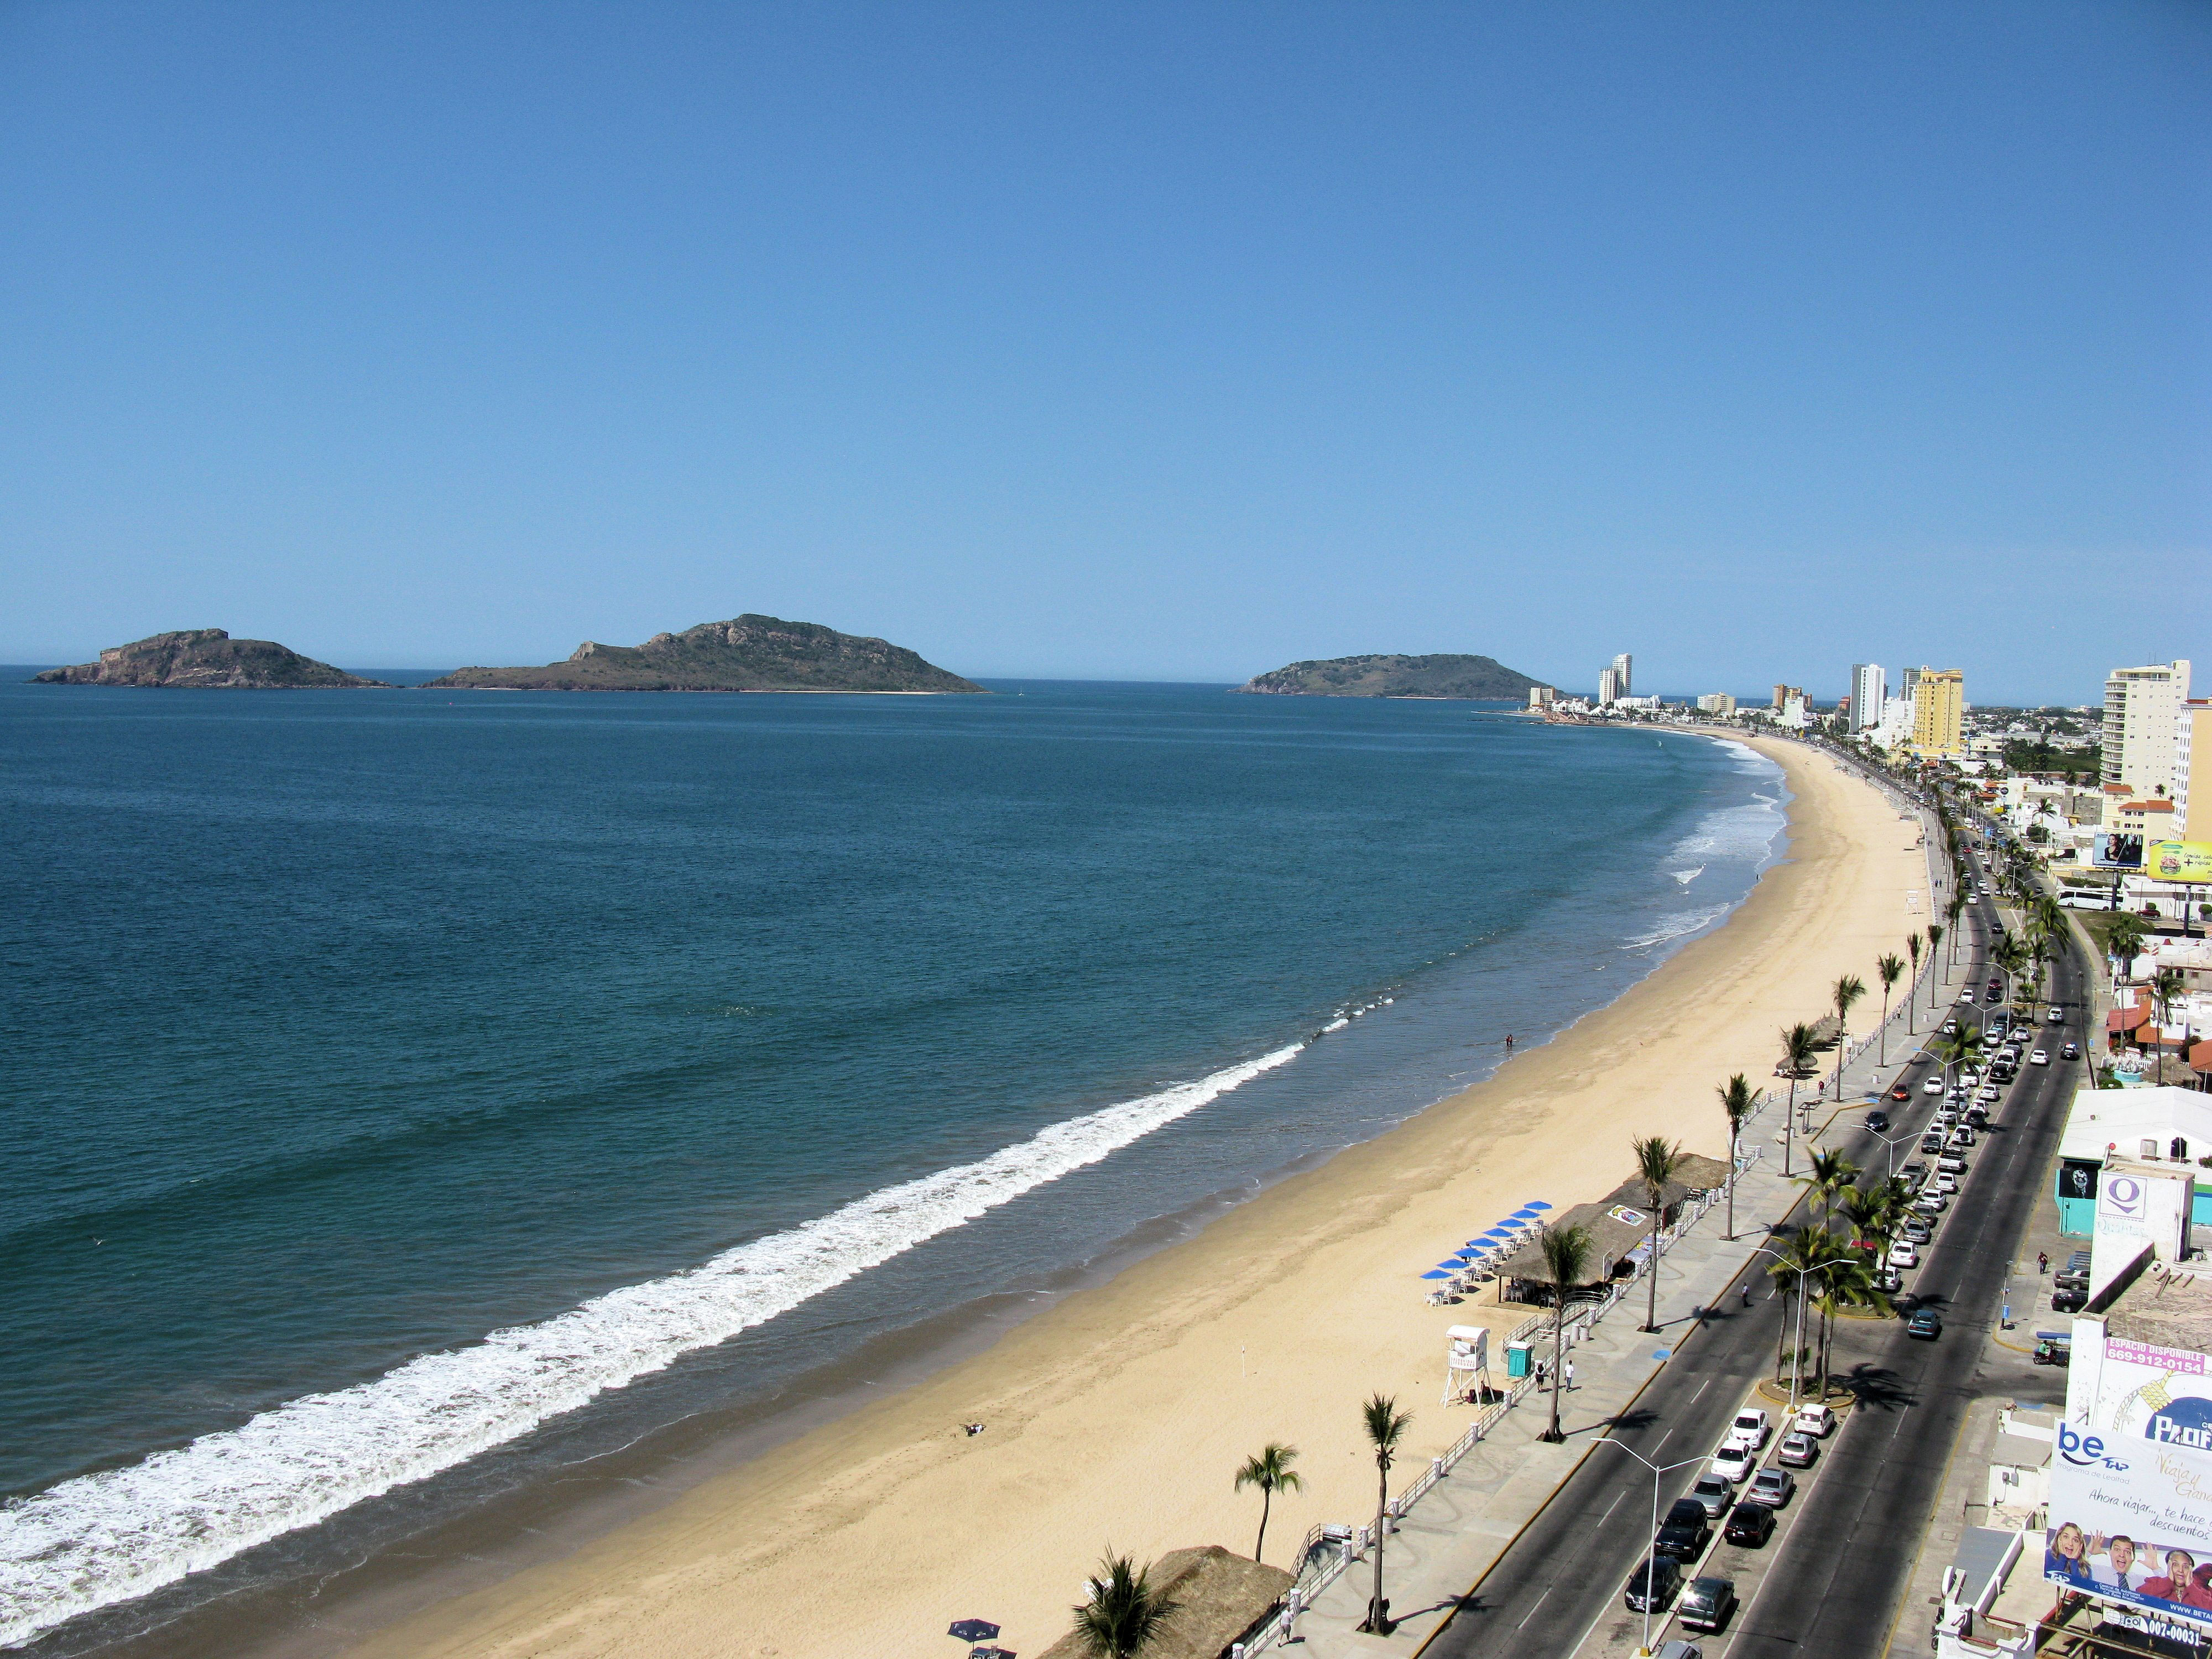 The sandy beaches in Mazatlán stretch for over 10 miles